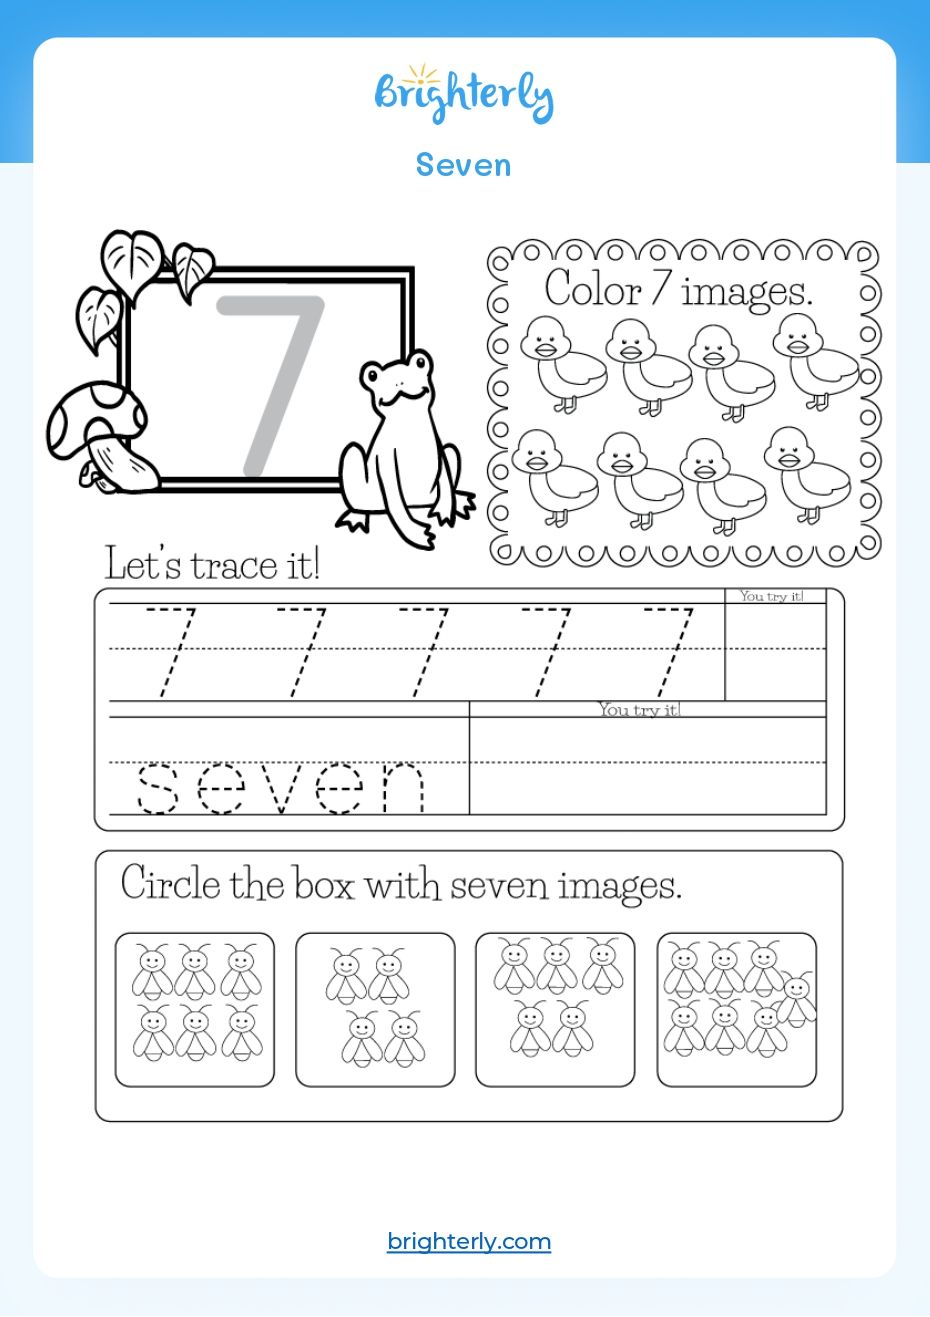 free-printable-number-7-seven-worksheets-for-kids-pdfs-brighterly